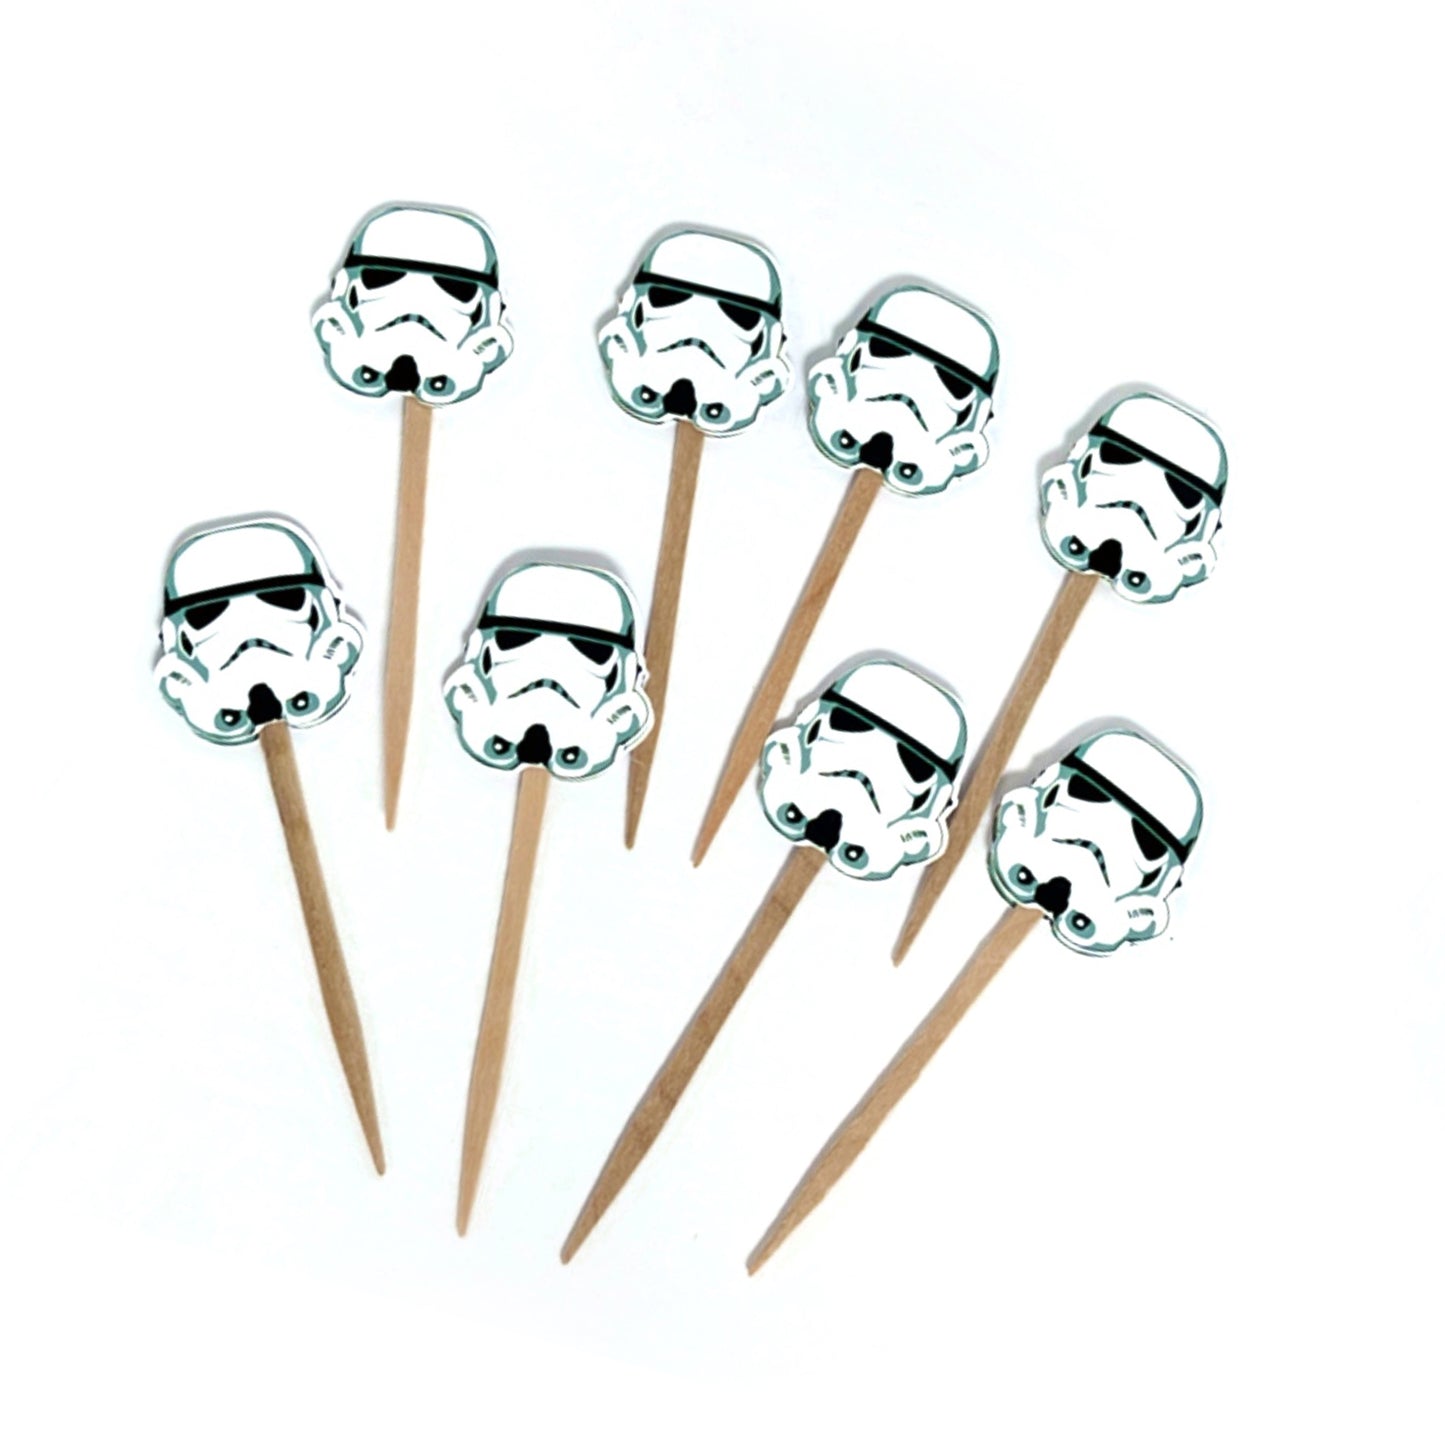 Starwars Cupcake Toppers